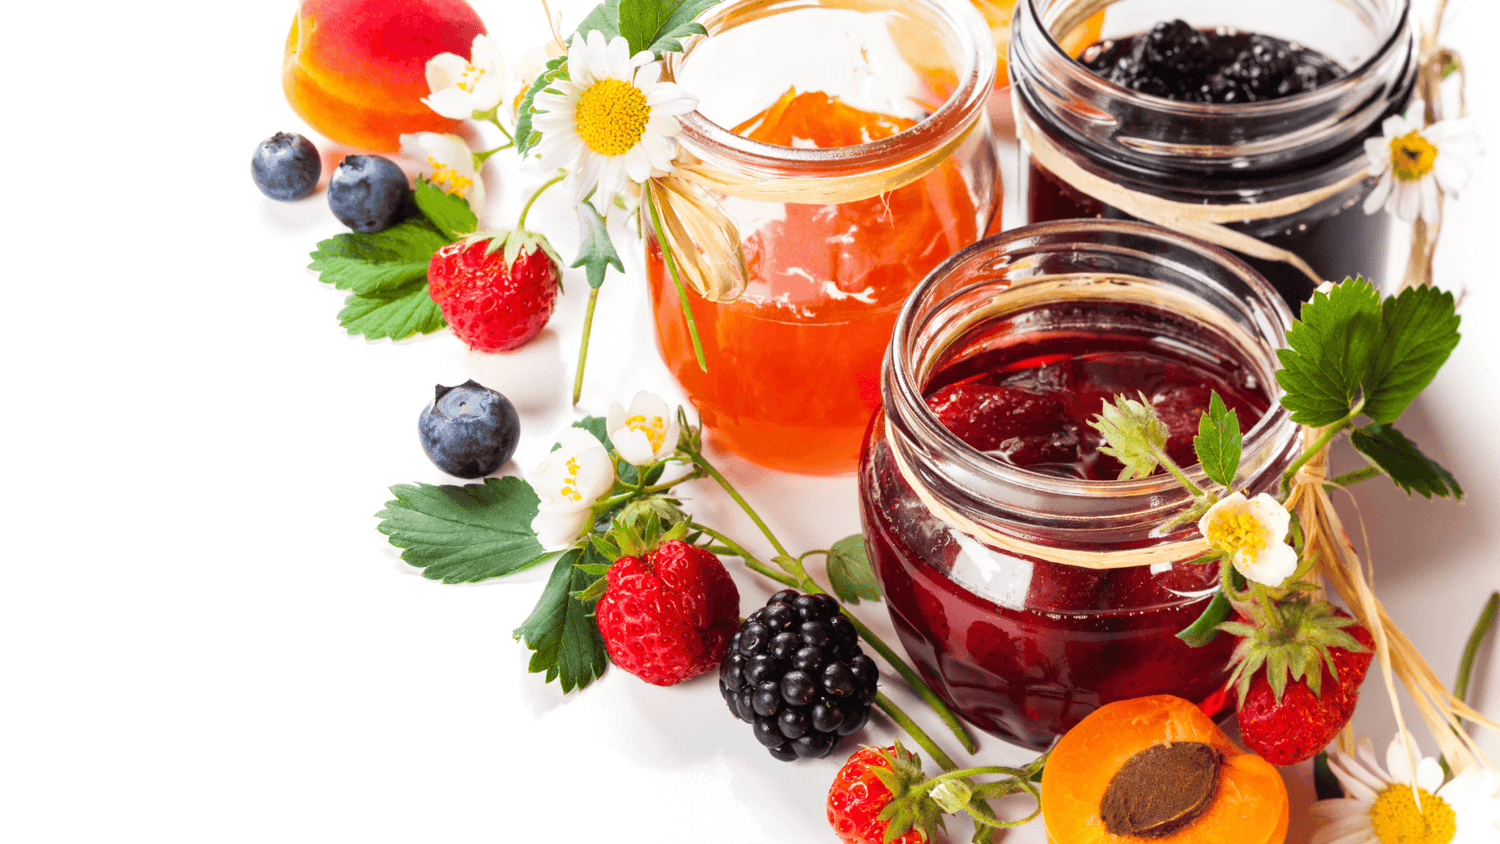 Jams in jars surrounded by fresh berries